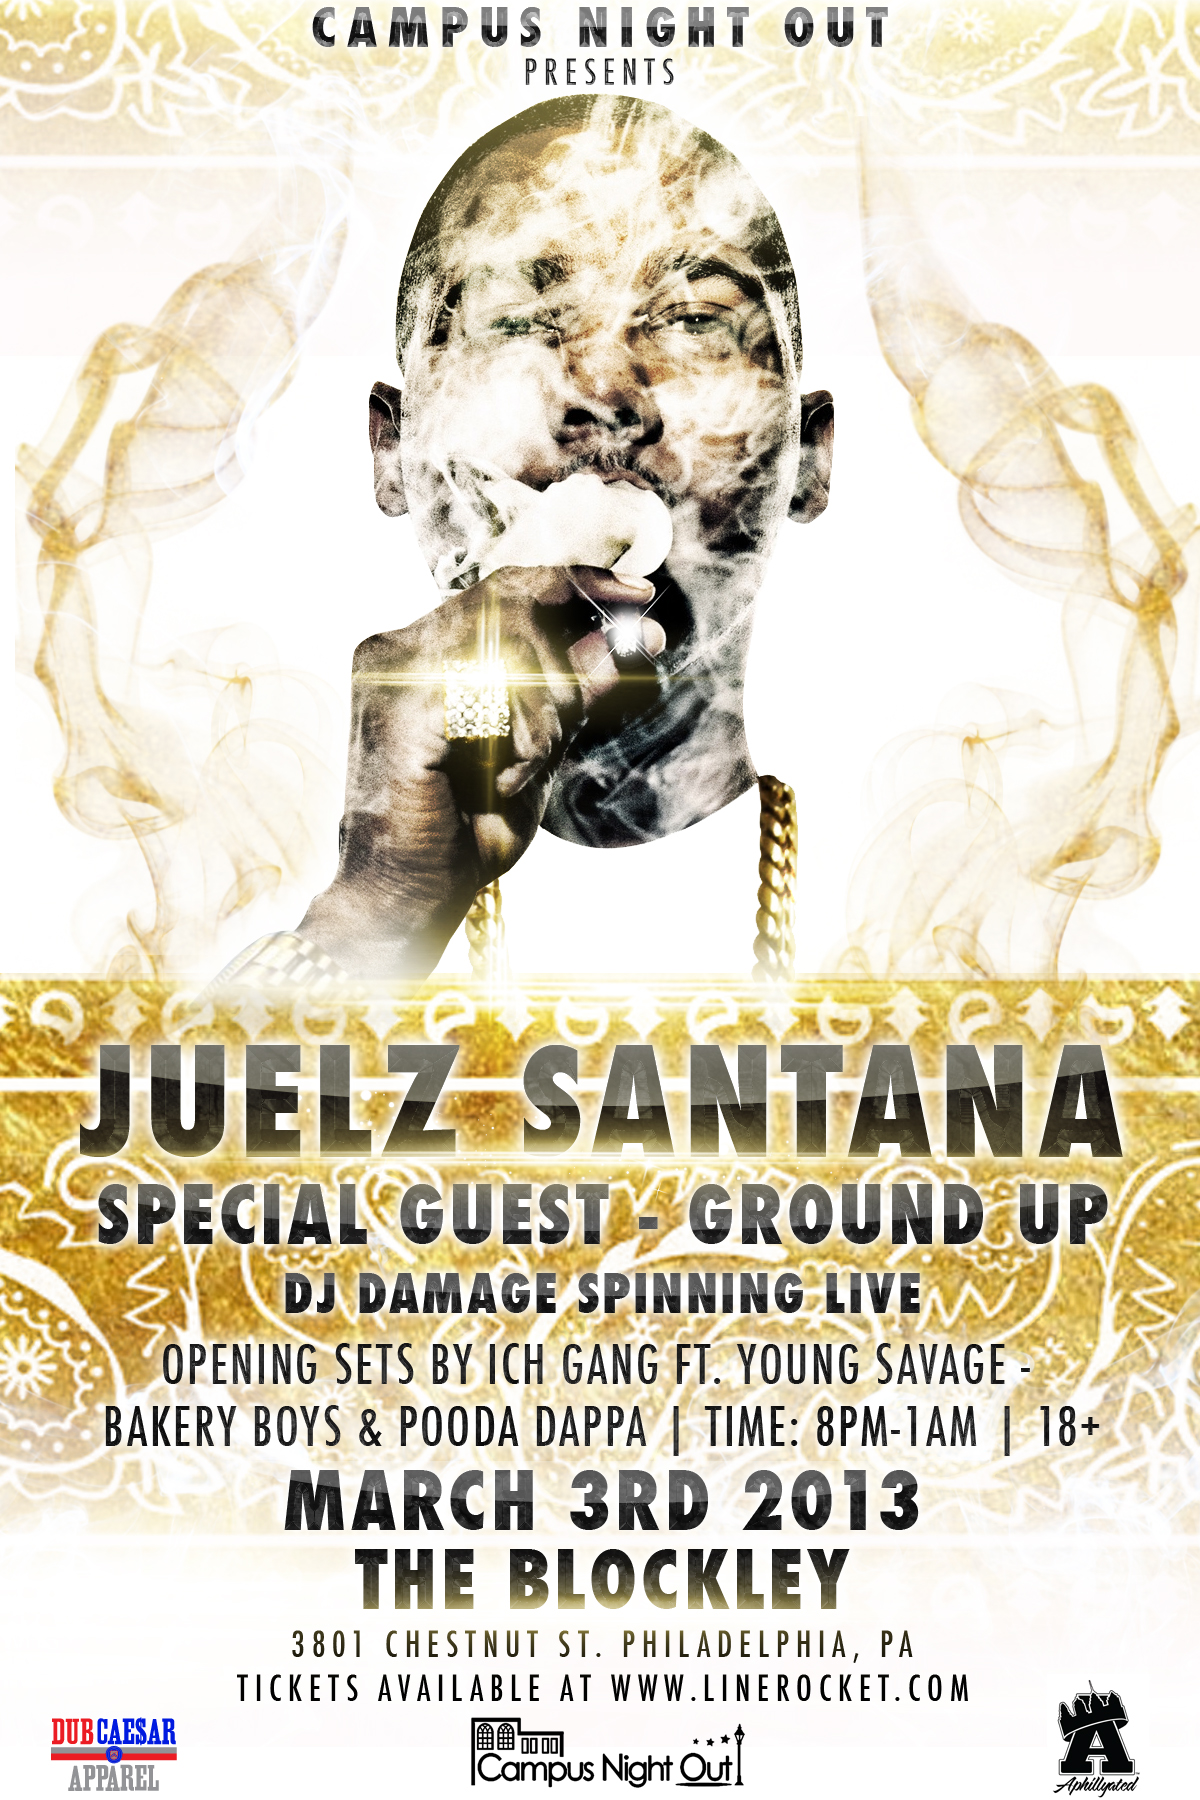 win-tickets-to-see-juelz-santana-live-in-philly-march-3-2013-2013 Win Tickets To See Juelz Santana Live In Philly (March 3, 2013) 